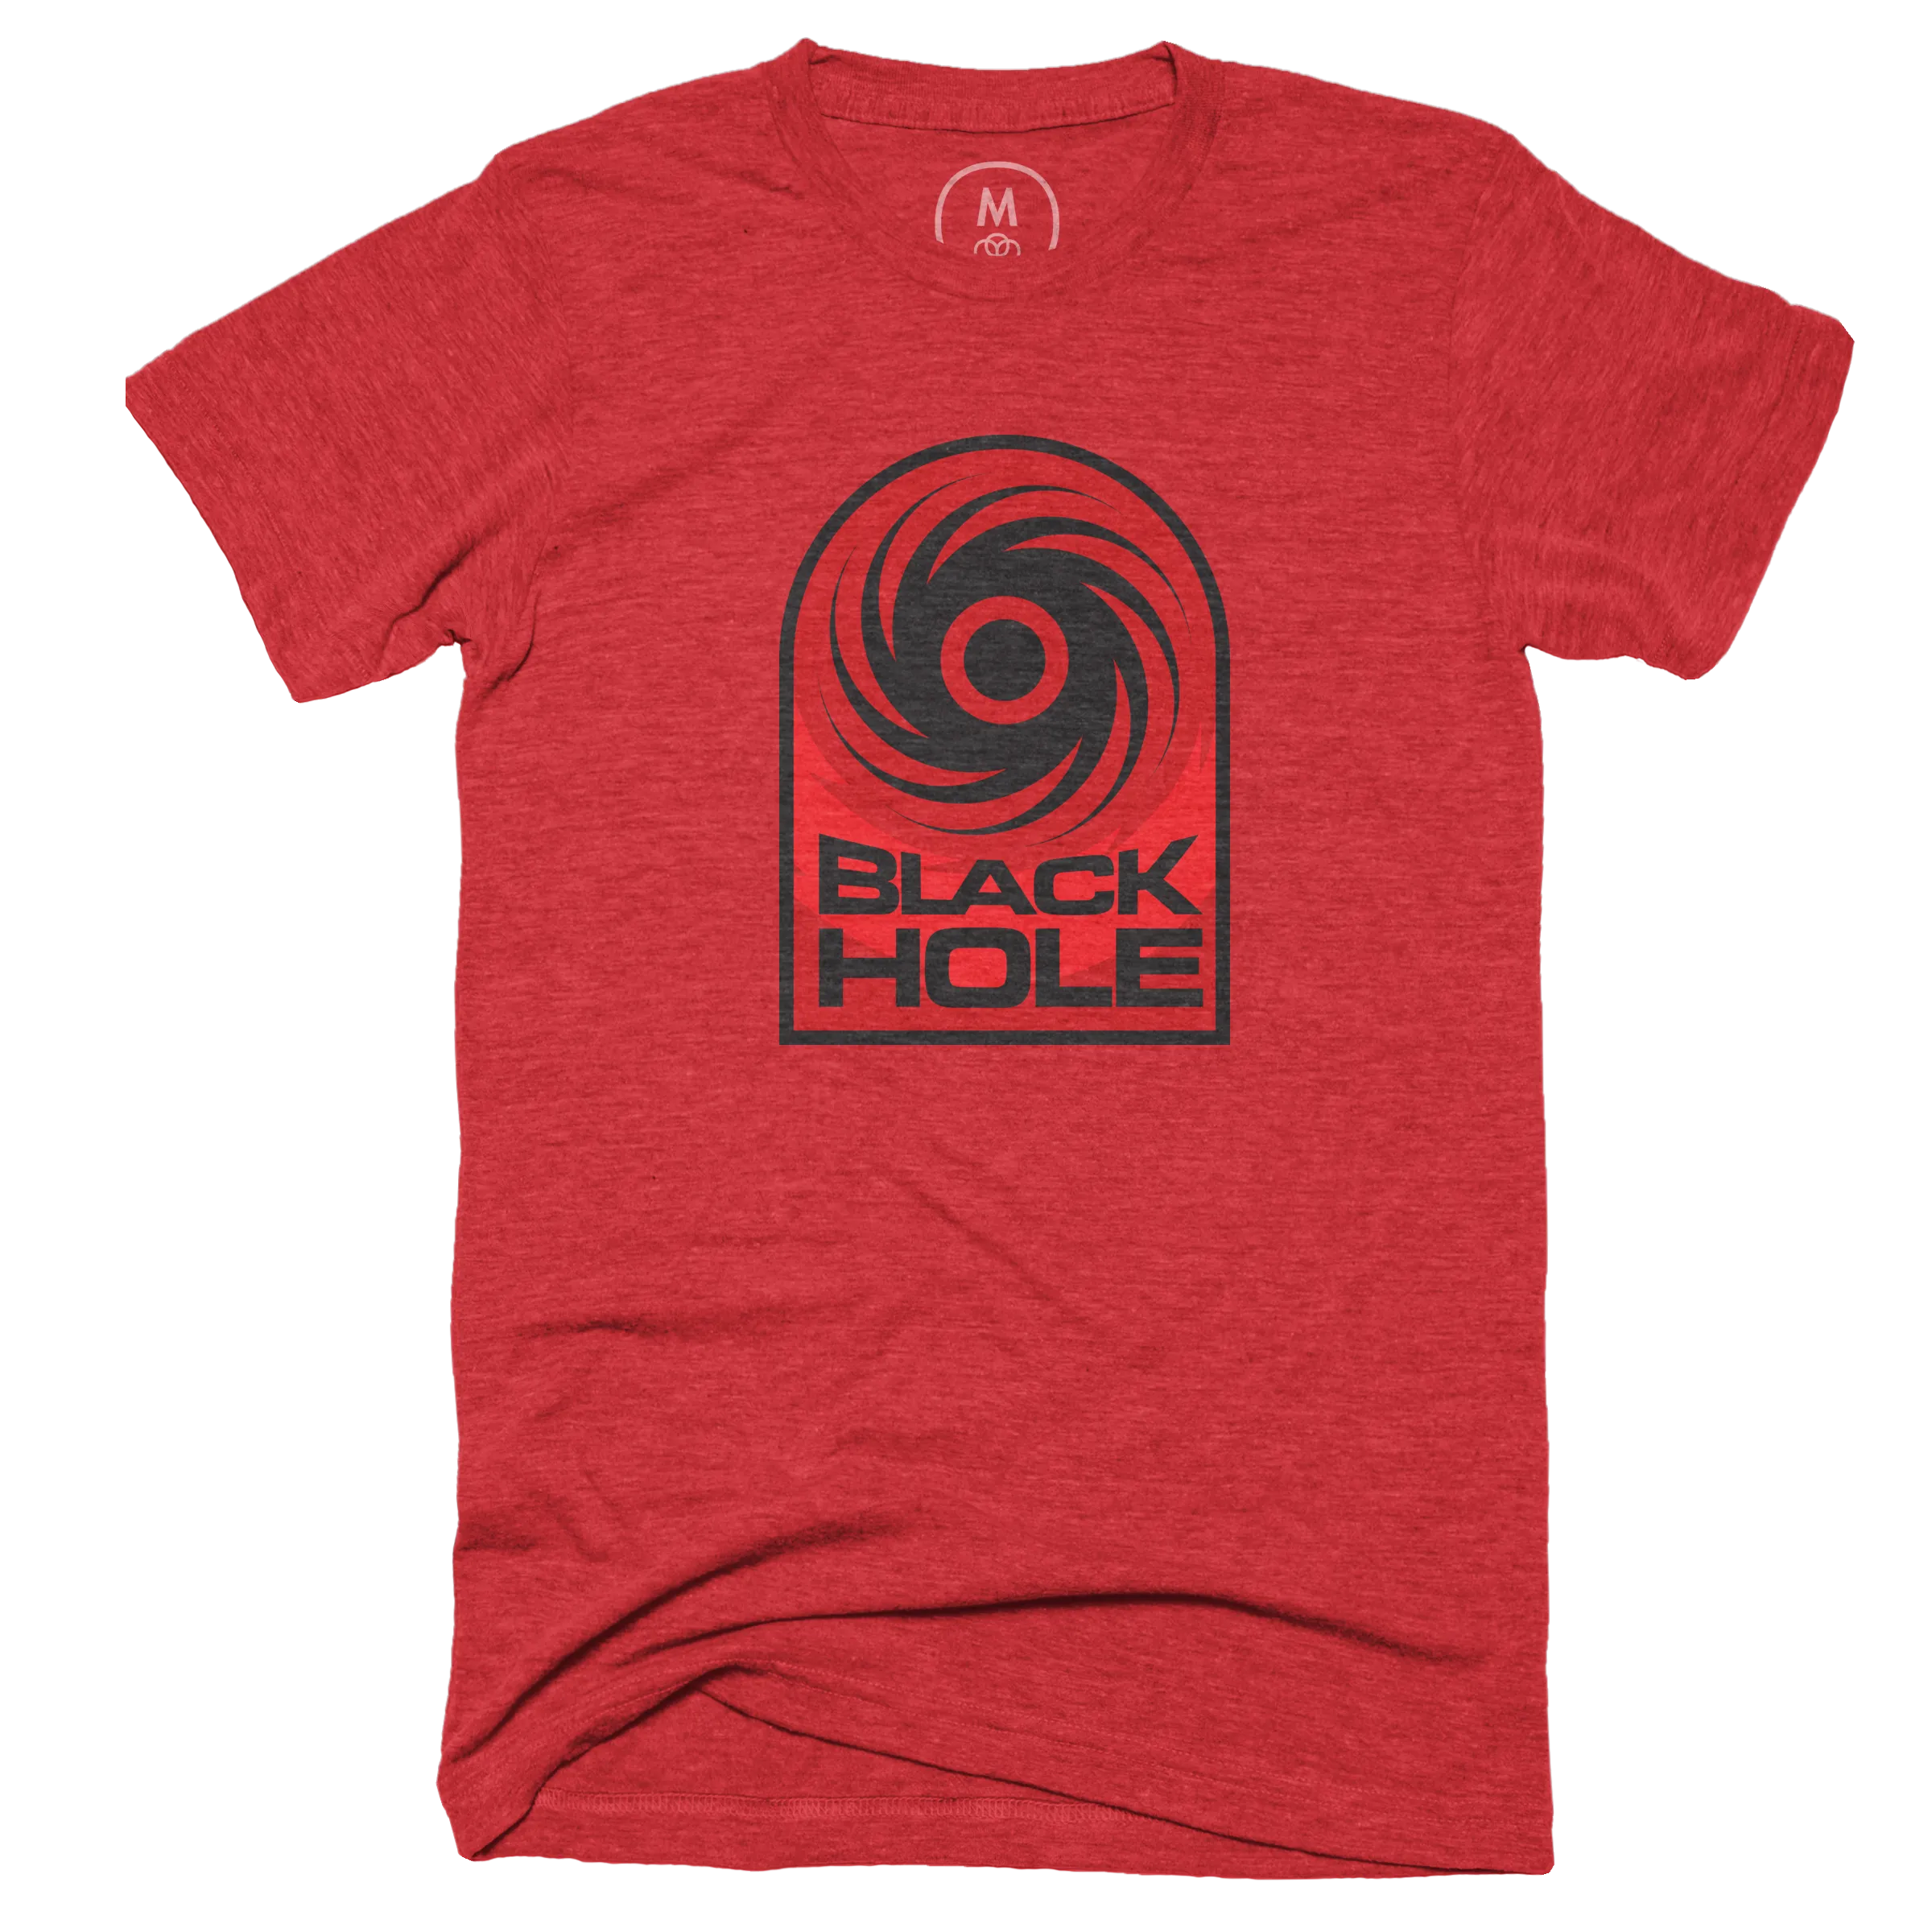 Black Hole” graphic tee, pullover hoodie, tank, onesie, and pullover  crewneck by Jamie Ferrato.